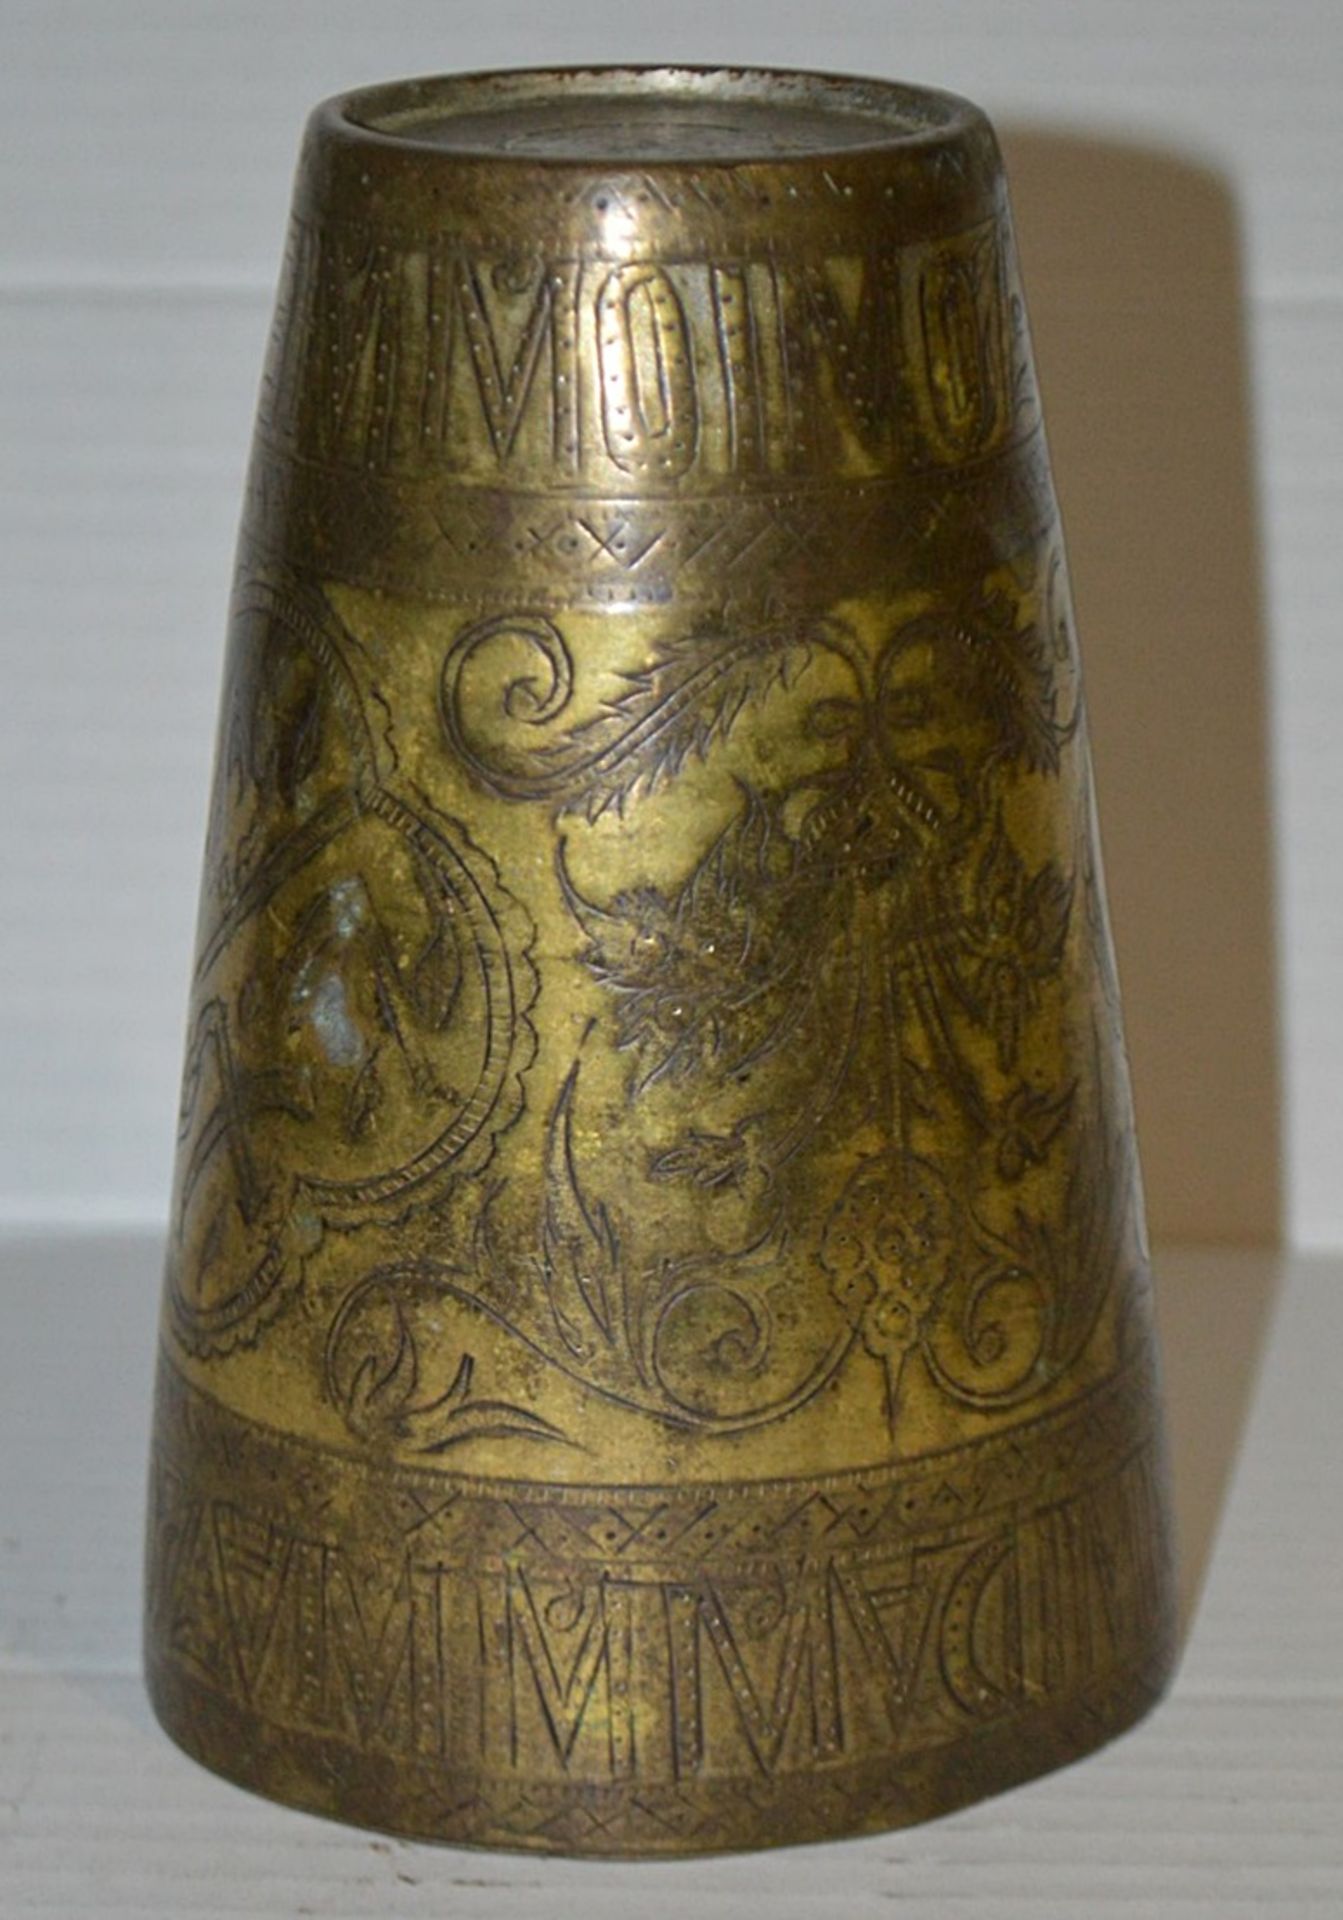 1 x Persian Gilded Tinner Beaker - Decorated With Floral Design And Scripture - Height: 14.5cm (5. - Image 2 of 6